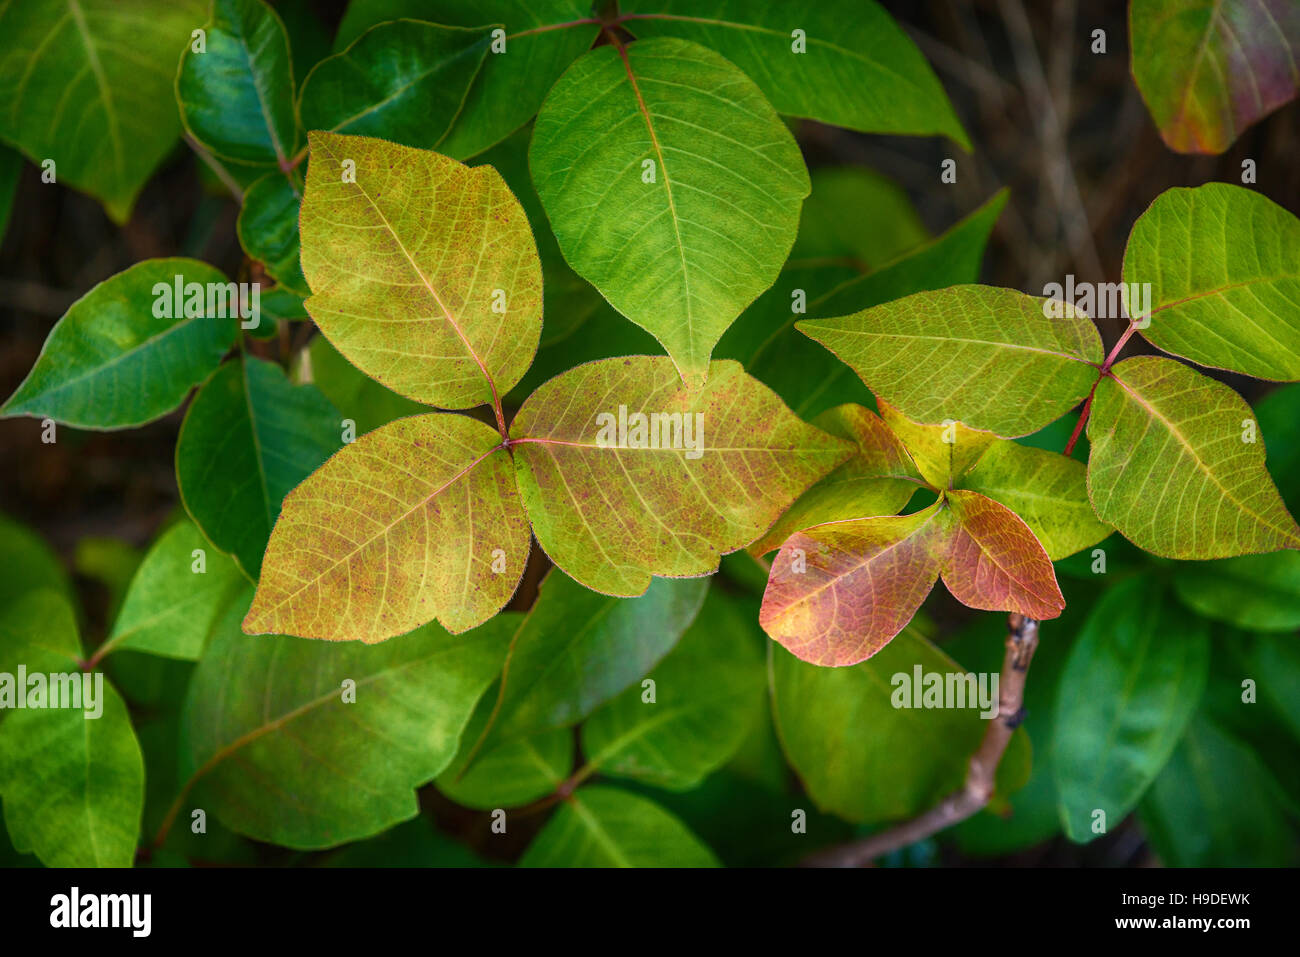 Leaves of Poison Ivy plant, Toxicodendron radicans Stock Photo